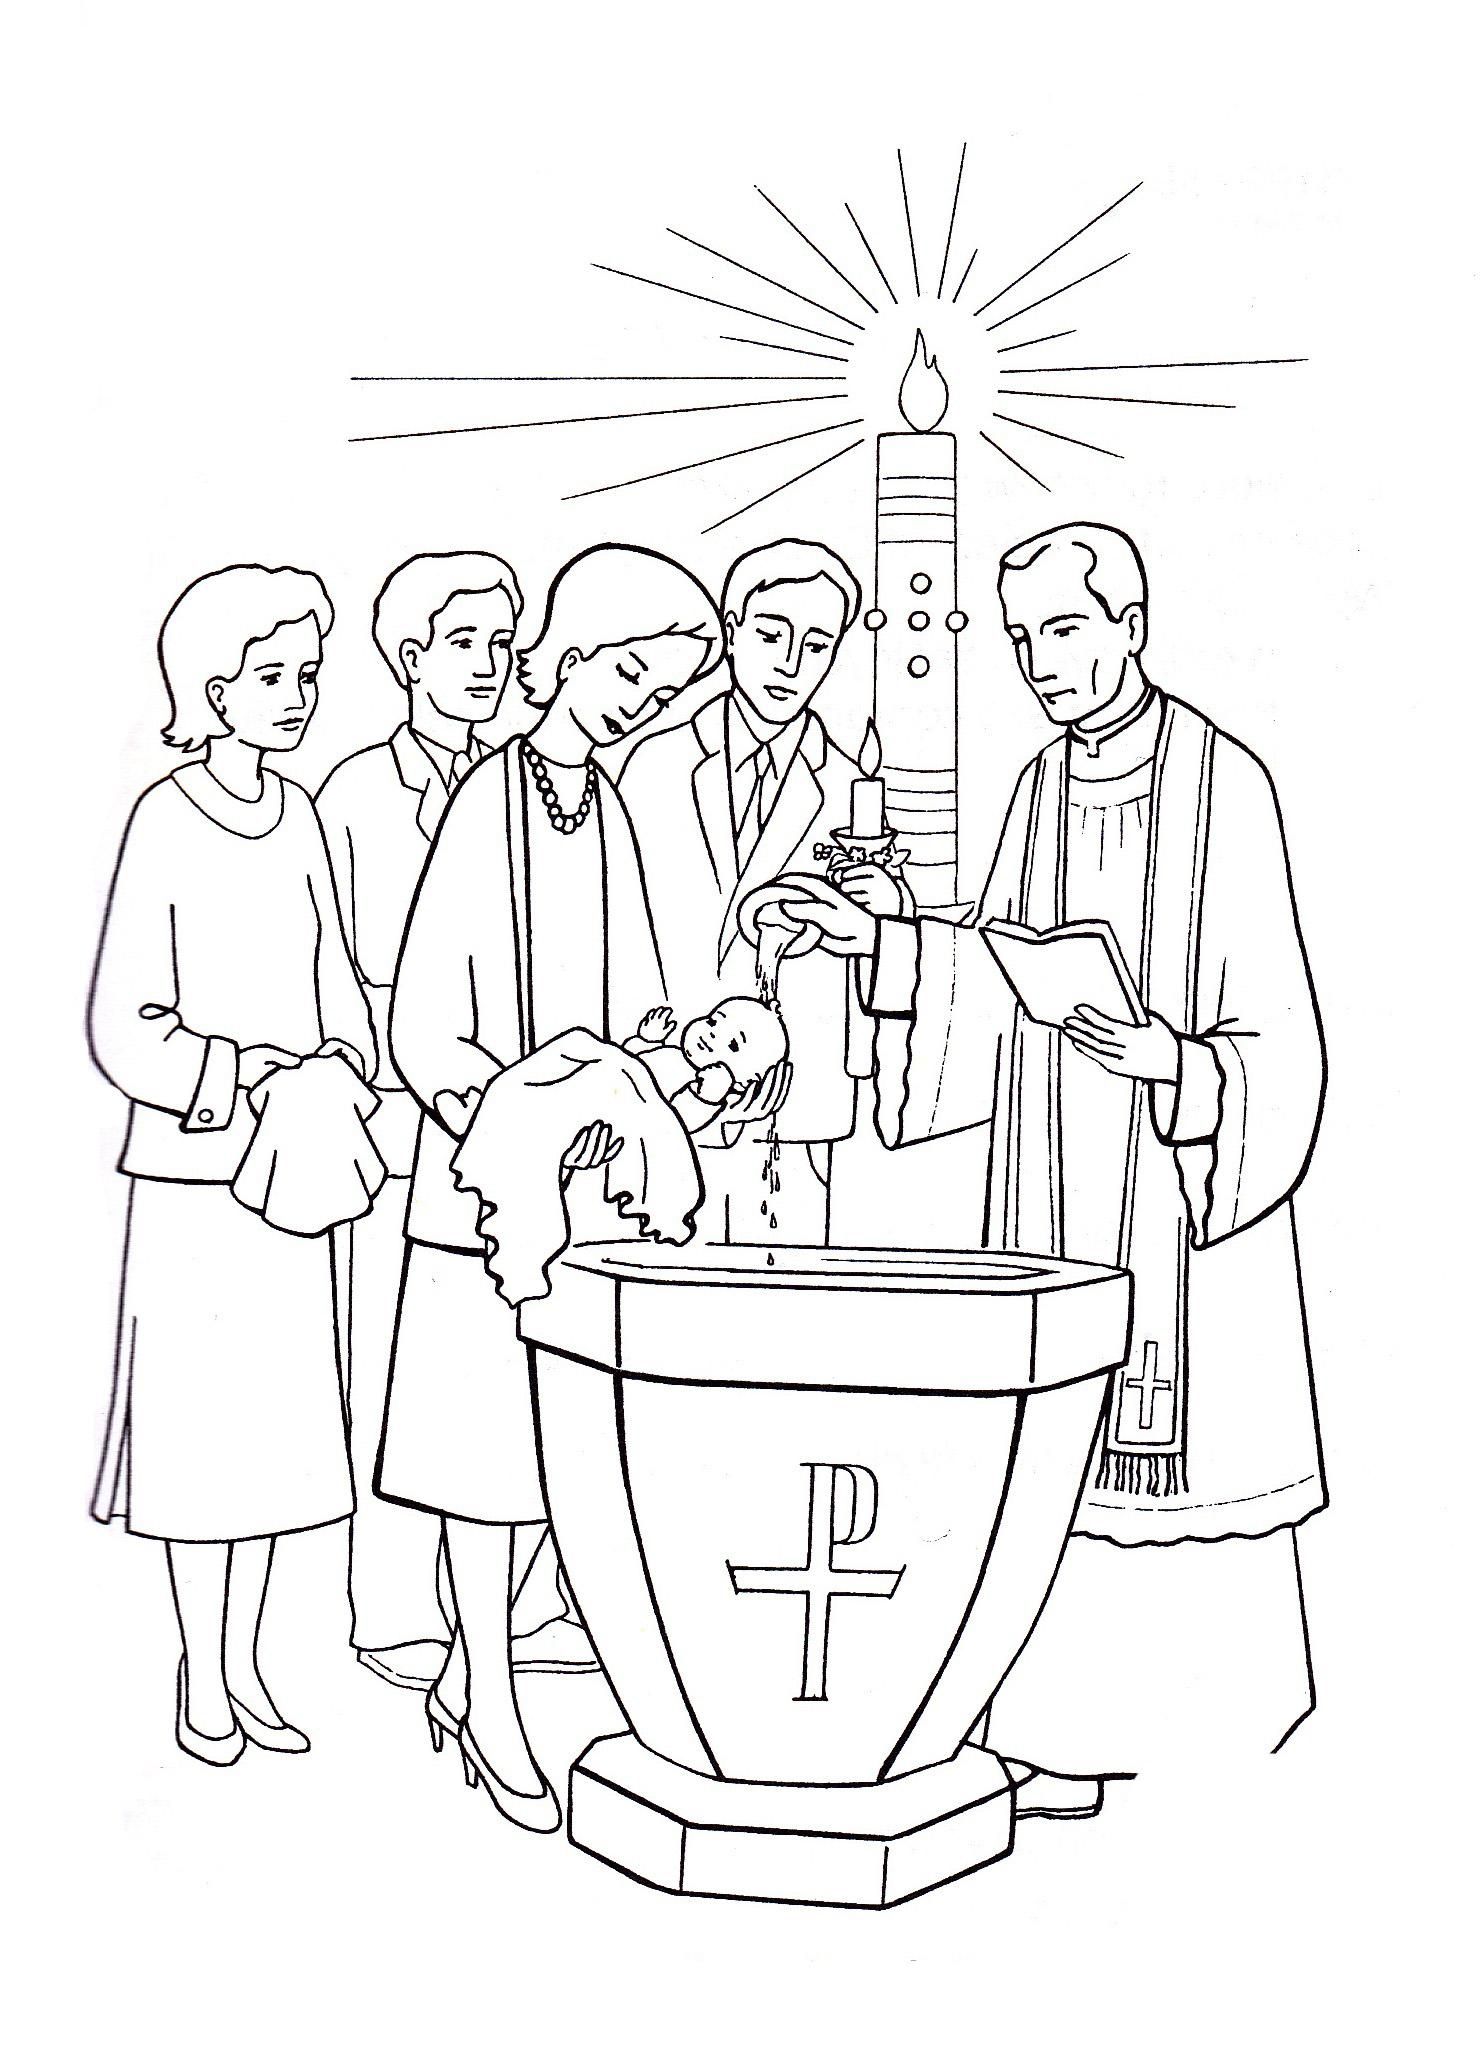 Baptism Coloring Pages Printable Pdf - Free Baptism Coloring Pages